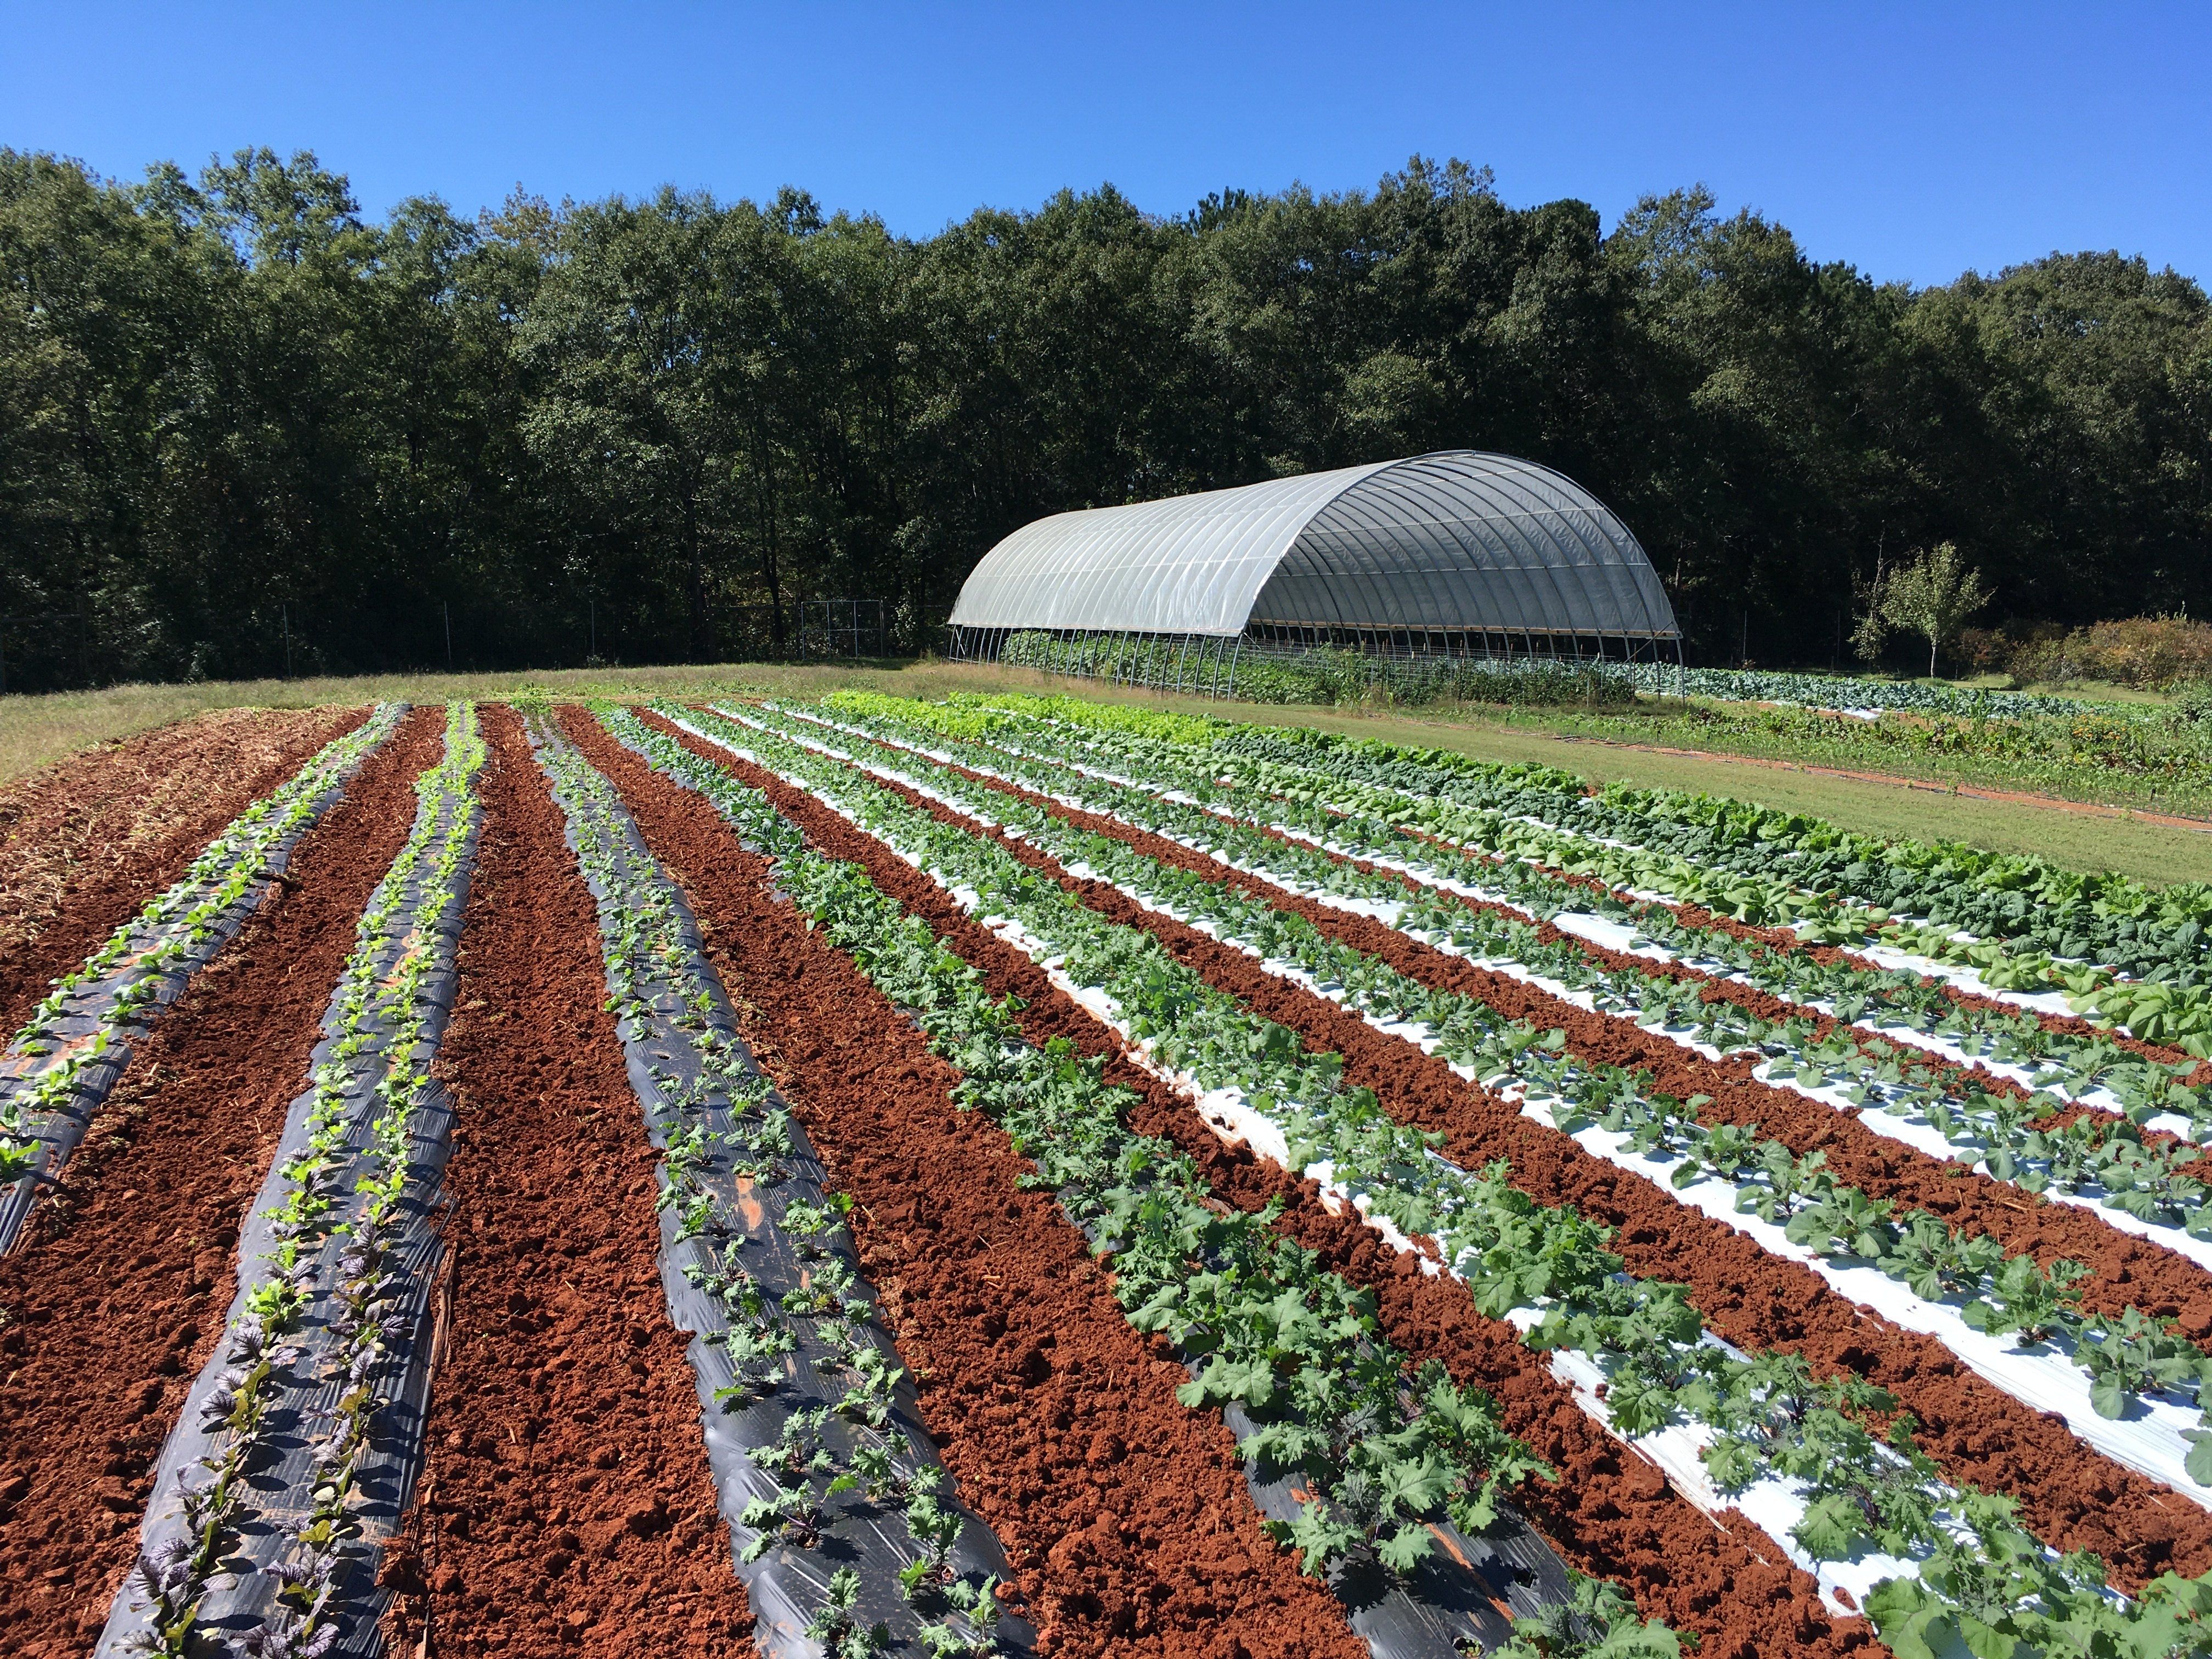 Previous Happening: Farm Happenings for October 8, 2020